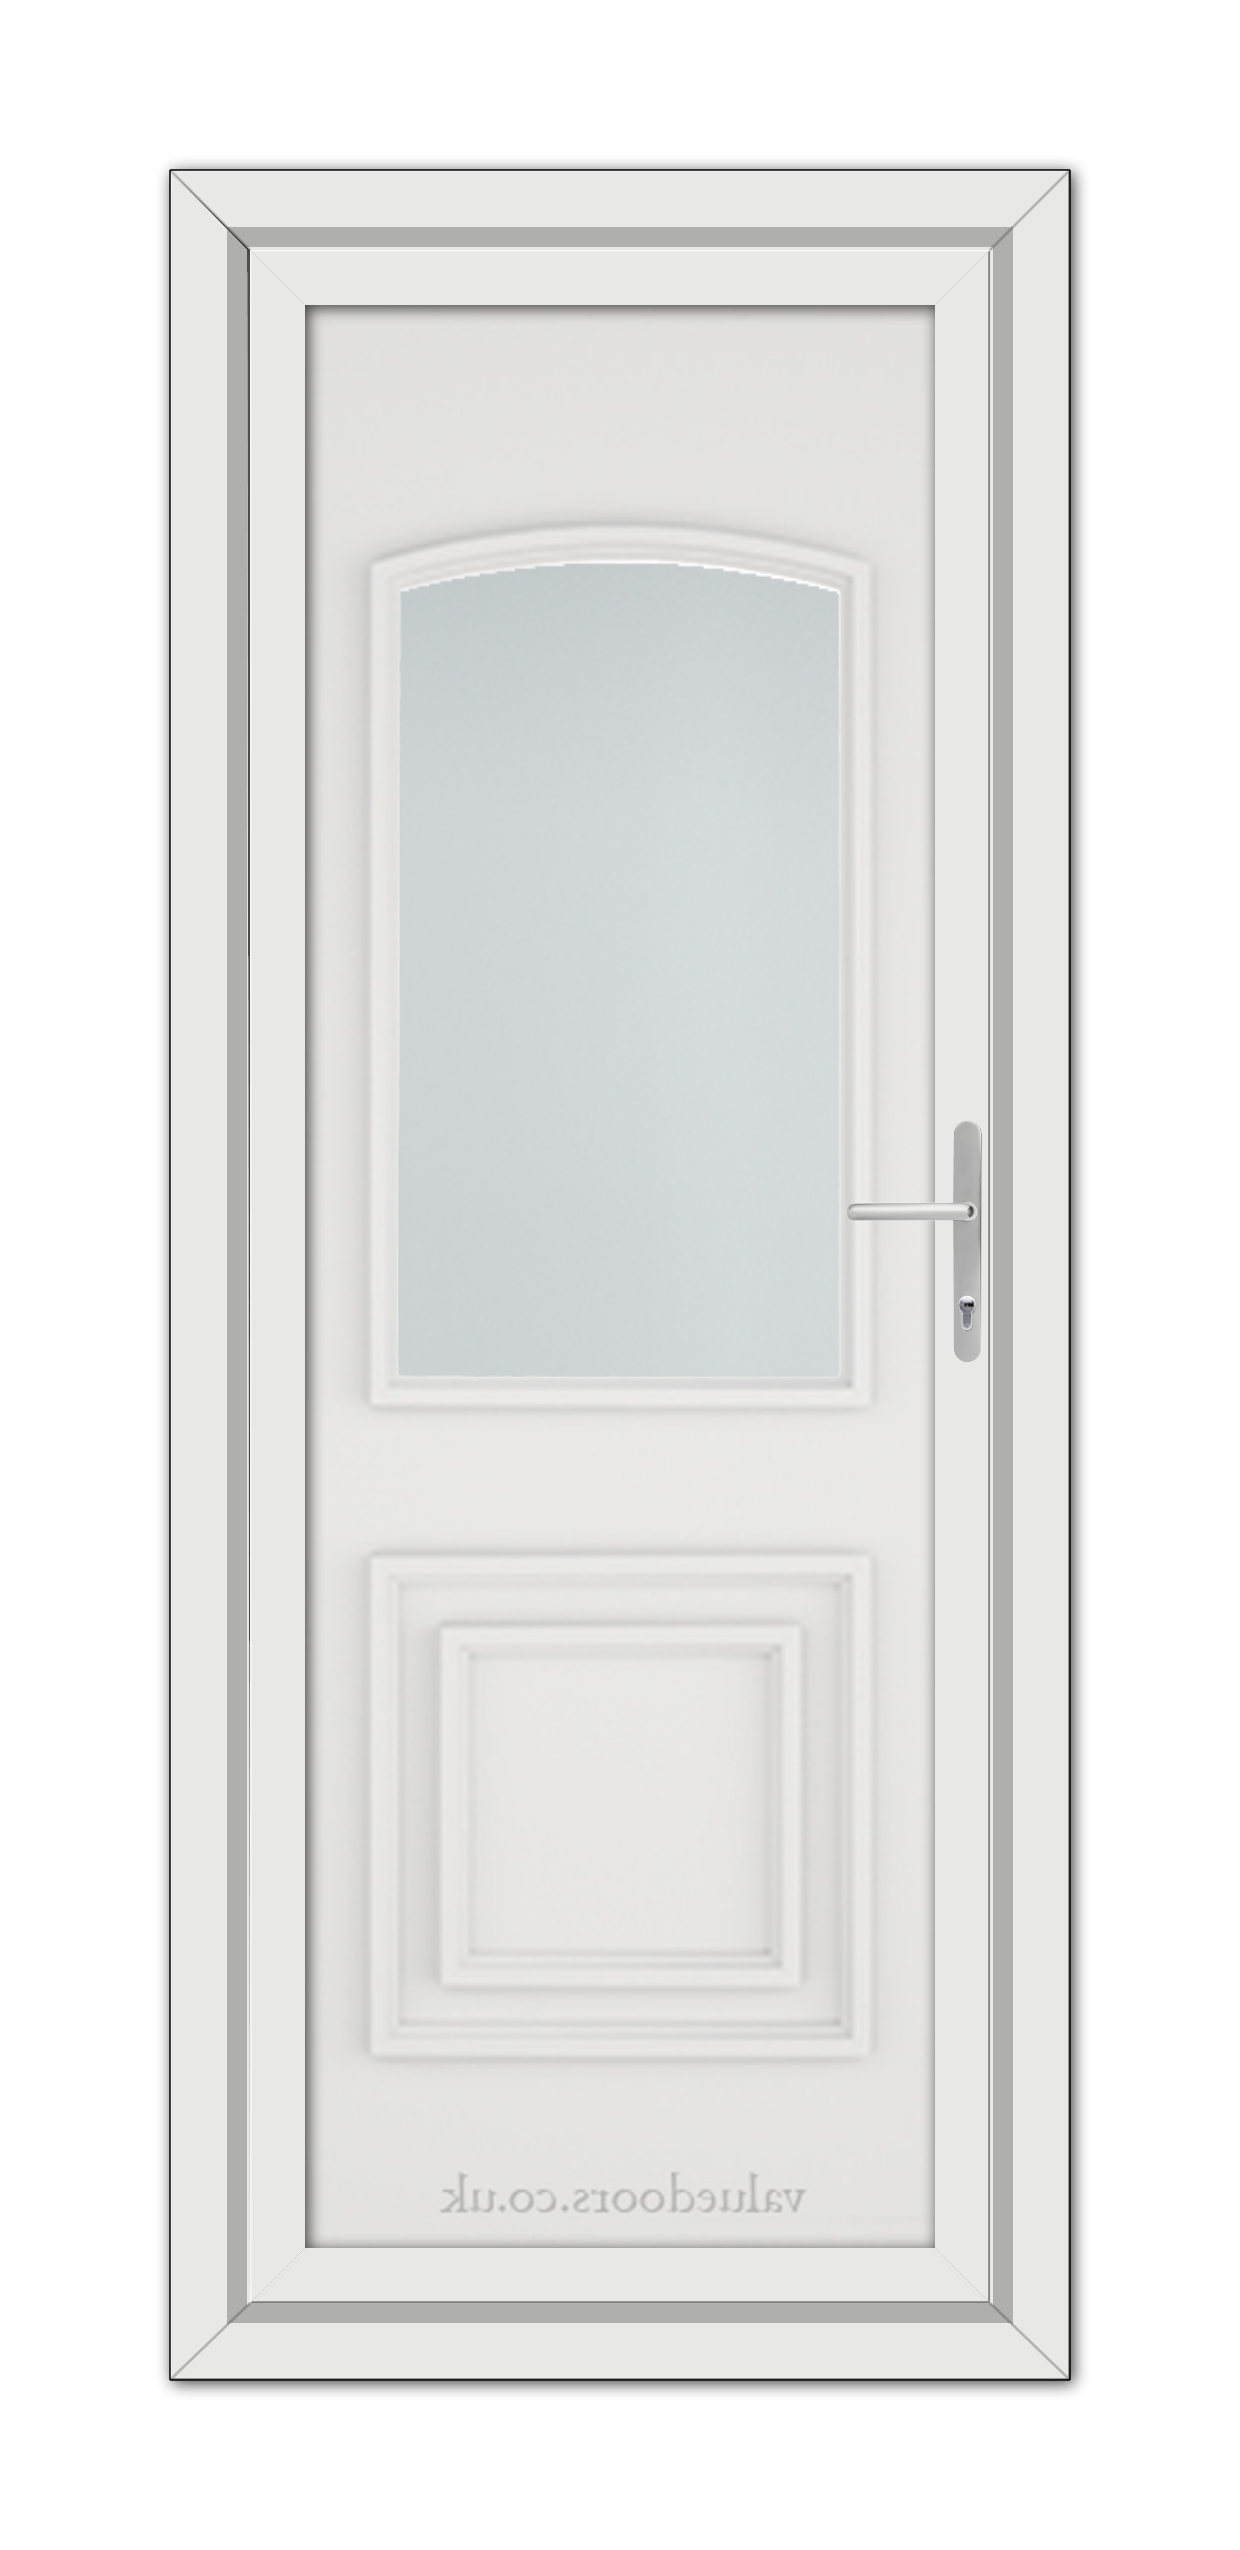 White Balmoral Classic uPVC Door featuring a vertical, oval glass panel at the top and a rectangular panel at the bottom, with a silver handle on the right.